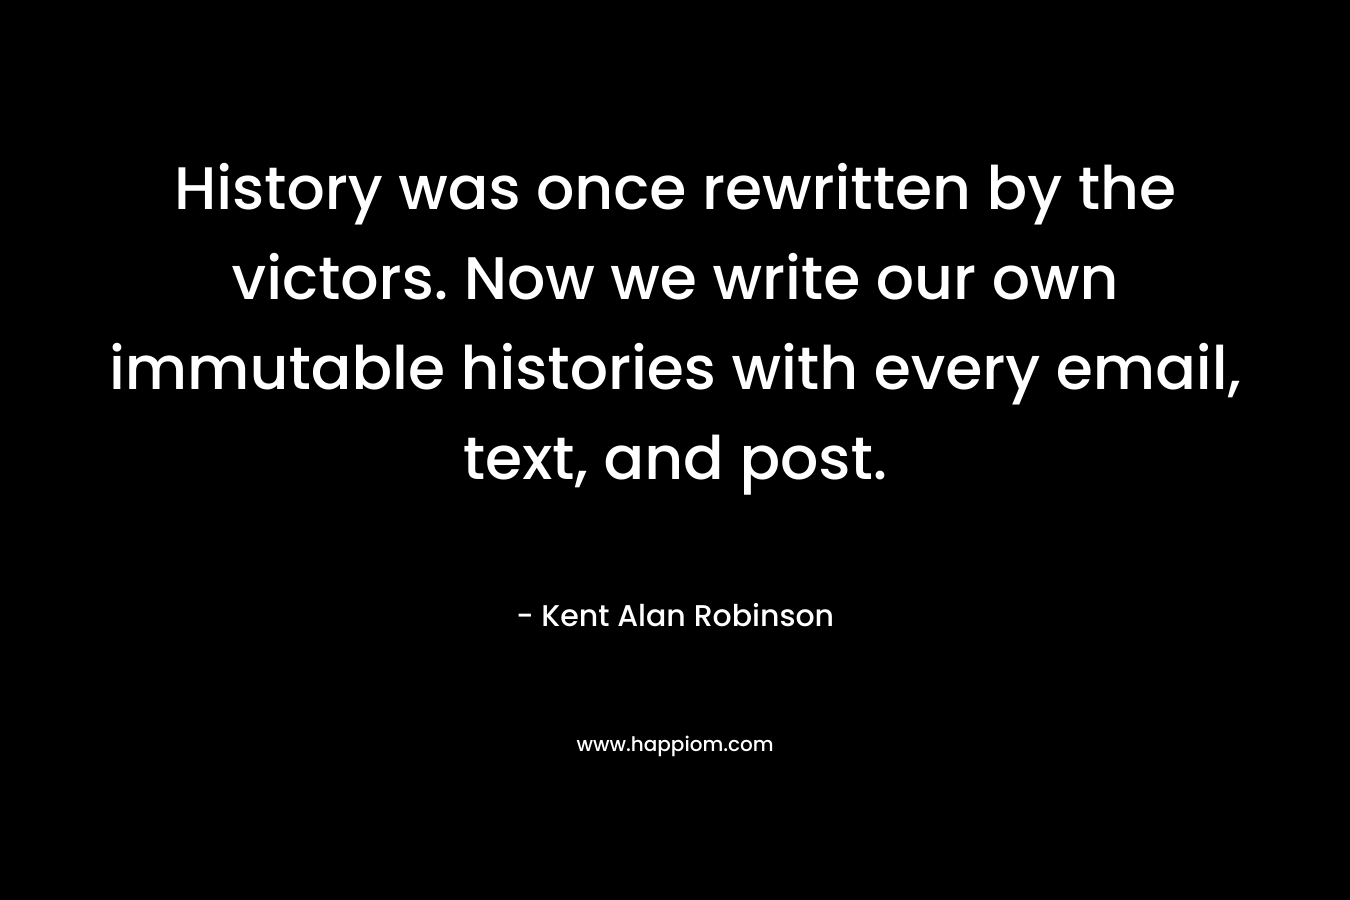 History was once rewritten by the victors. Now we write our own immutable histories with every email, text, and post. – Kent Alan Robinson